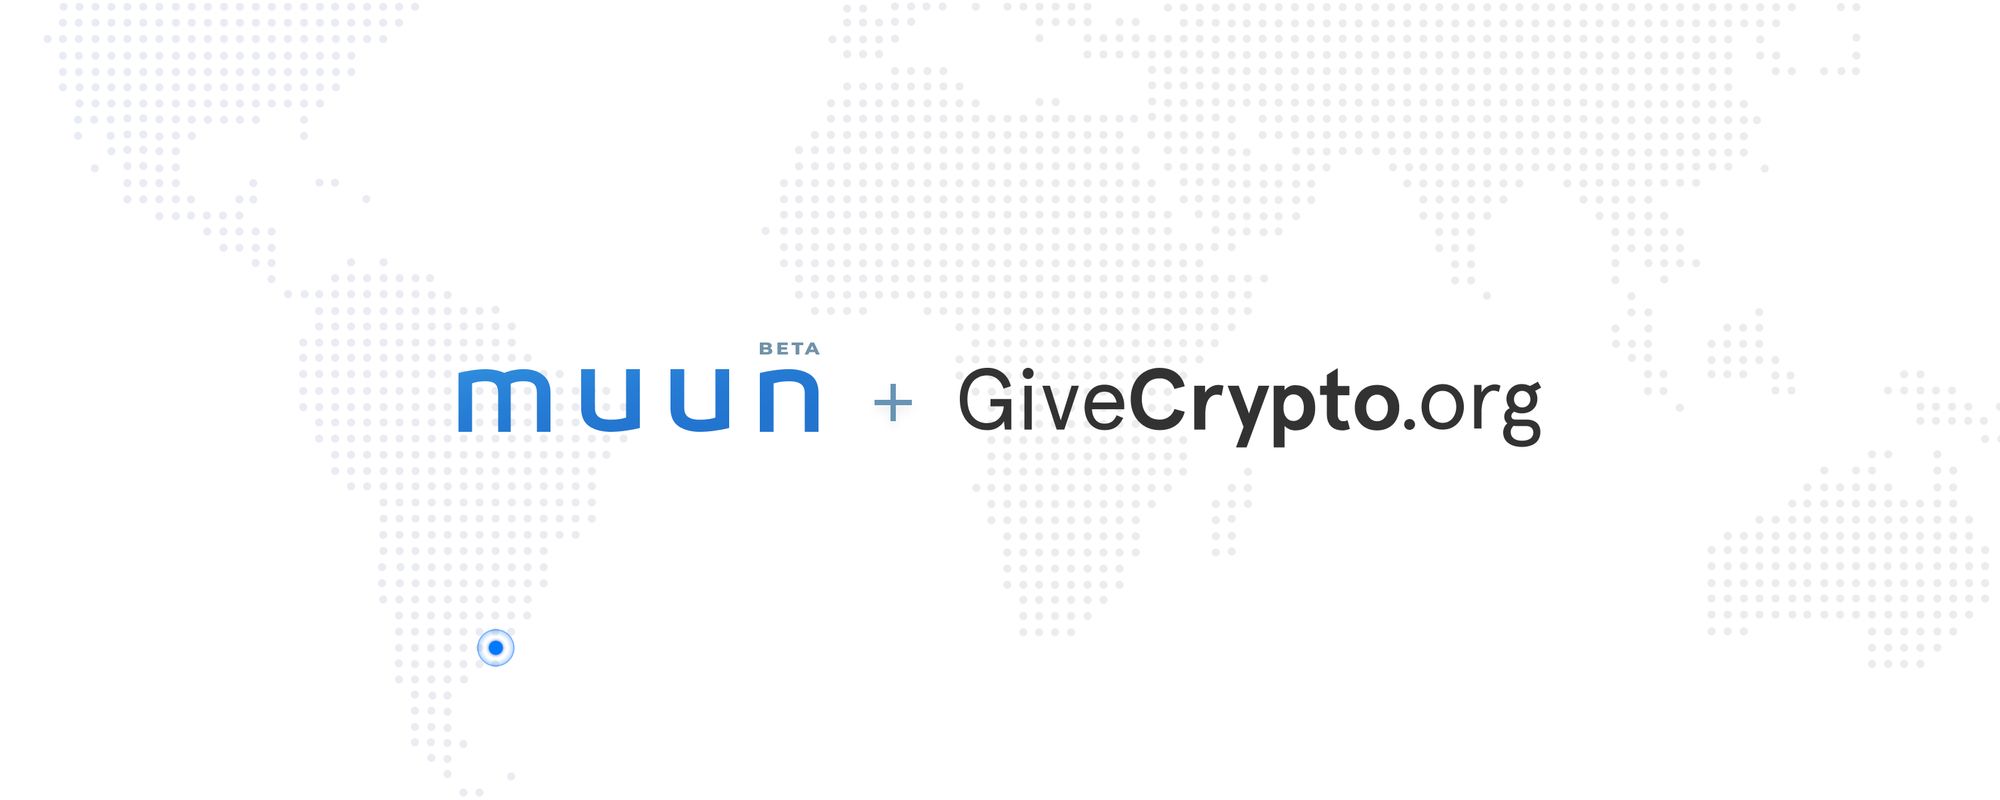 Muun & GiveCrypto: Banking the Unbanked with Bitcoin in Argentina